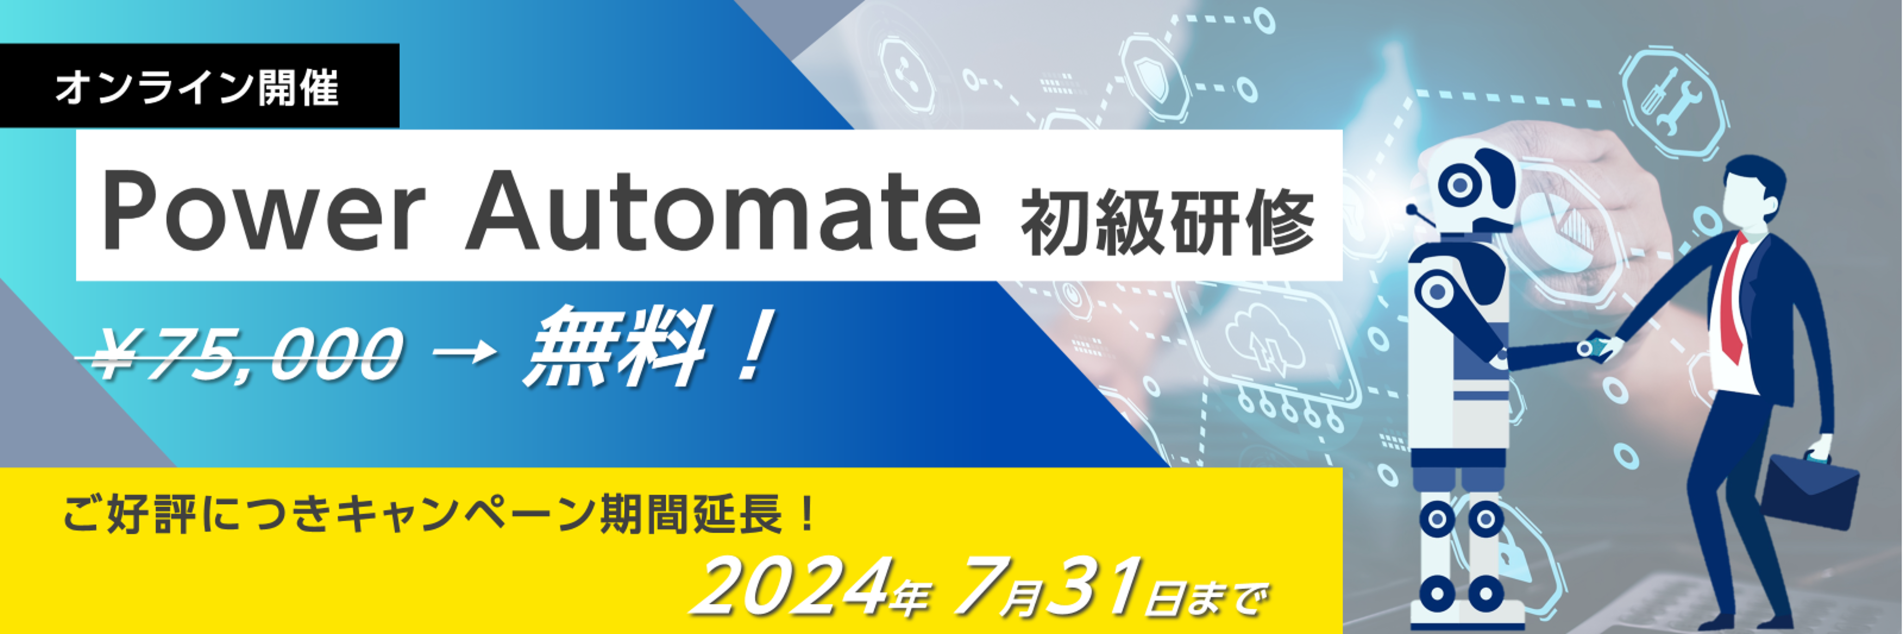 Power Automate 研修